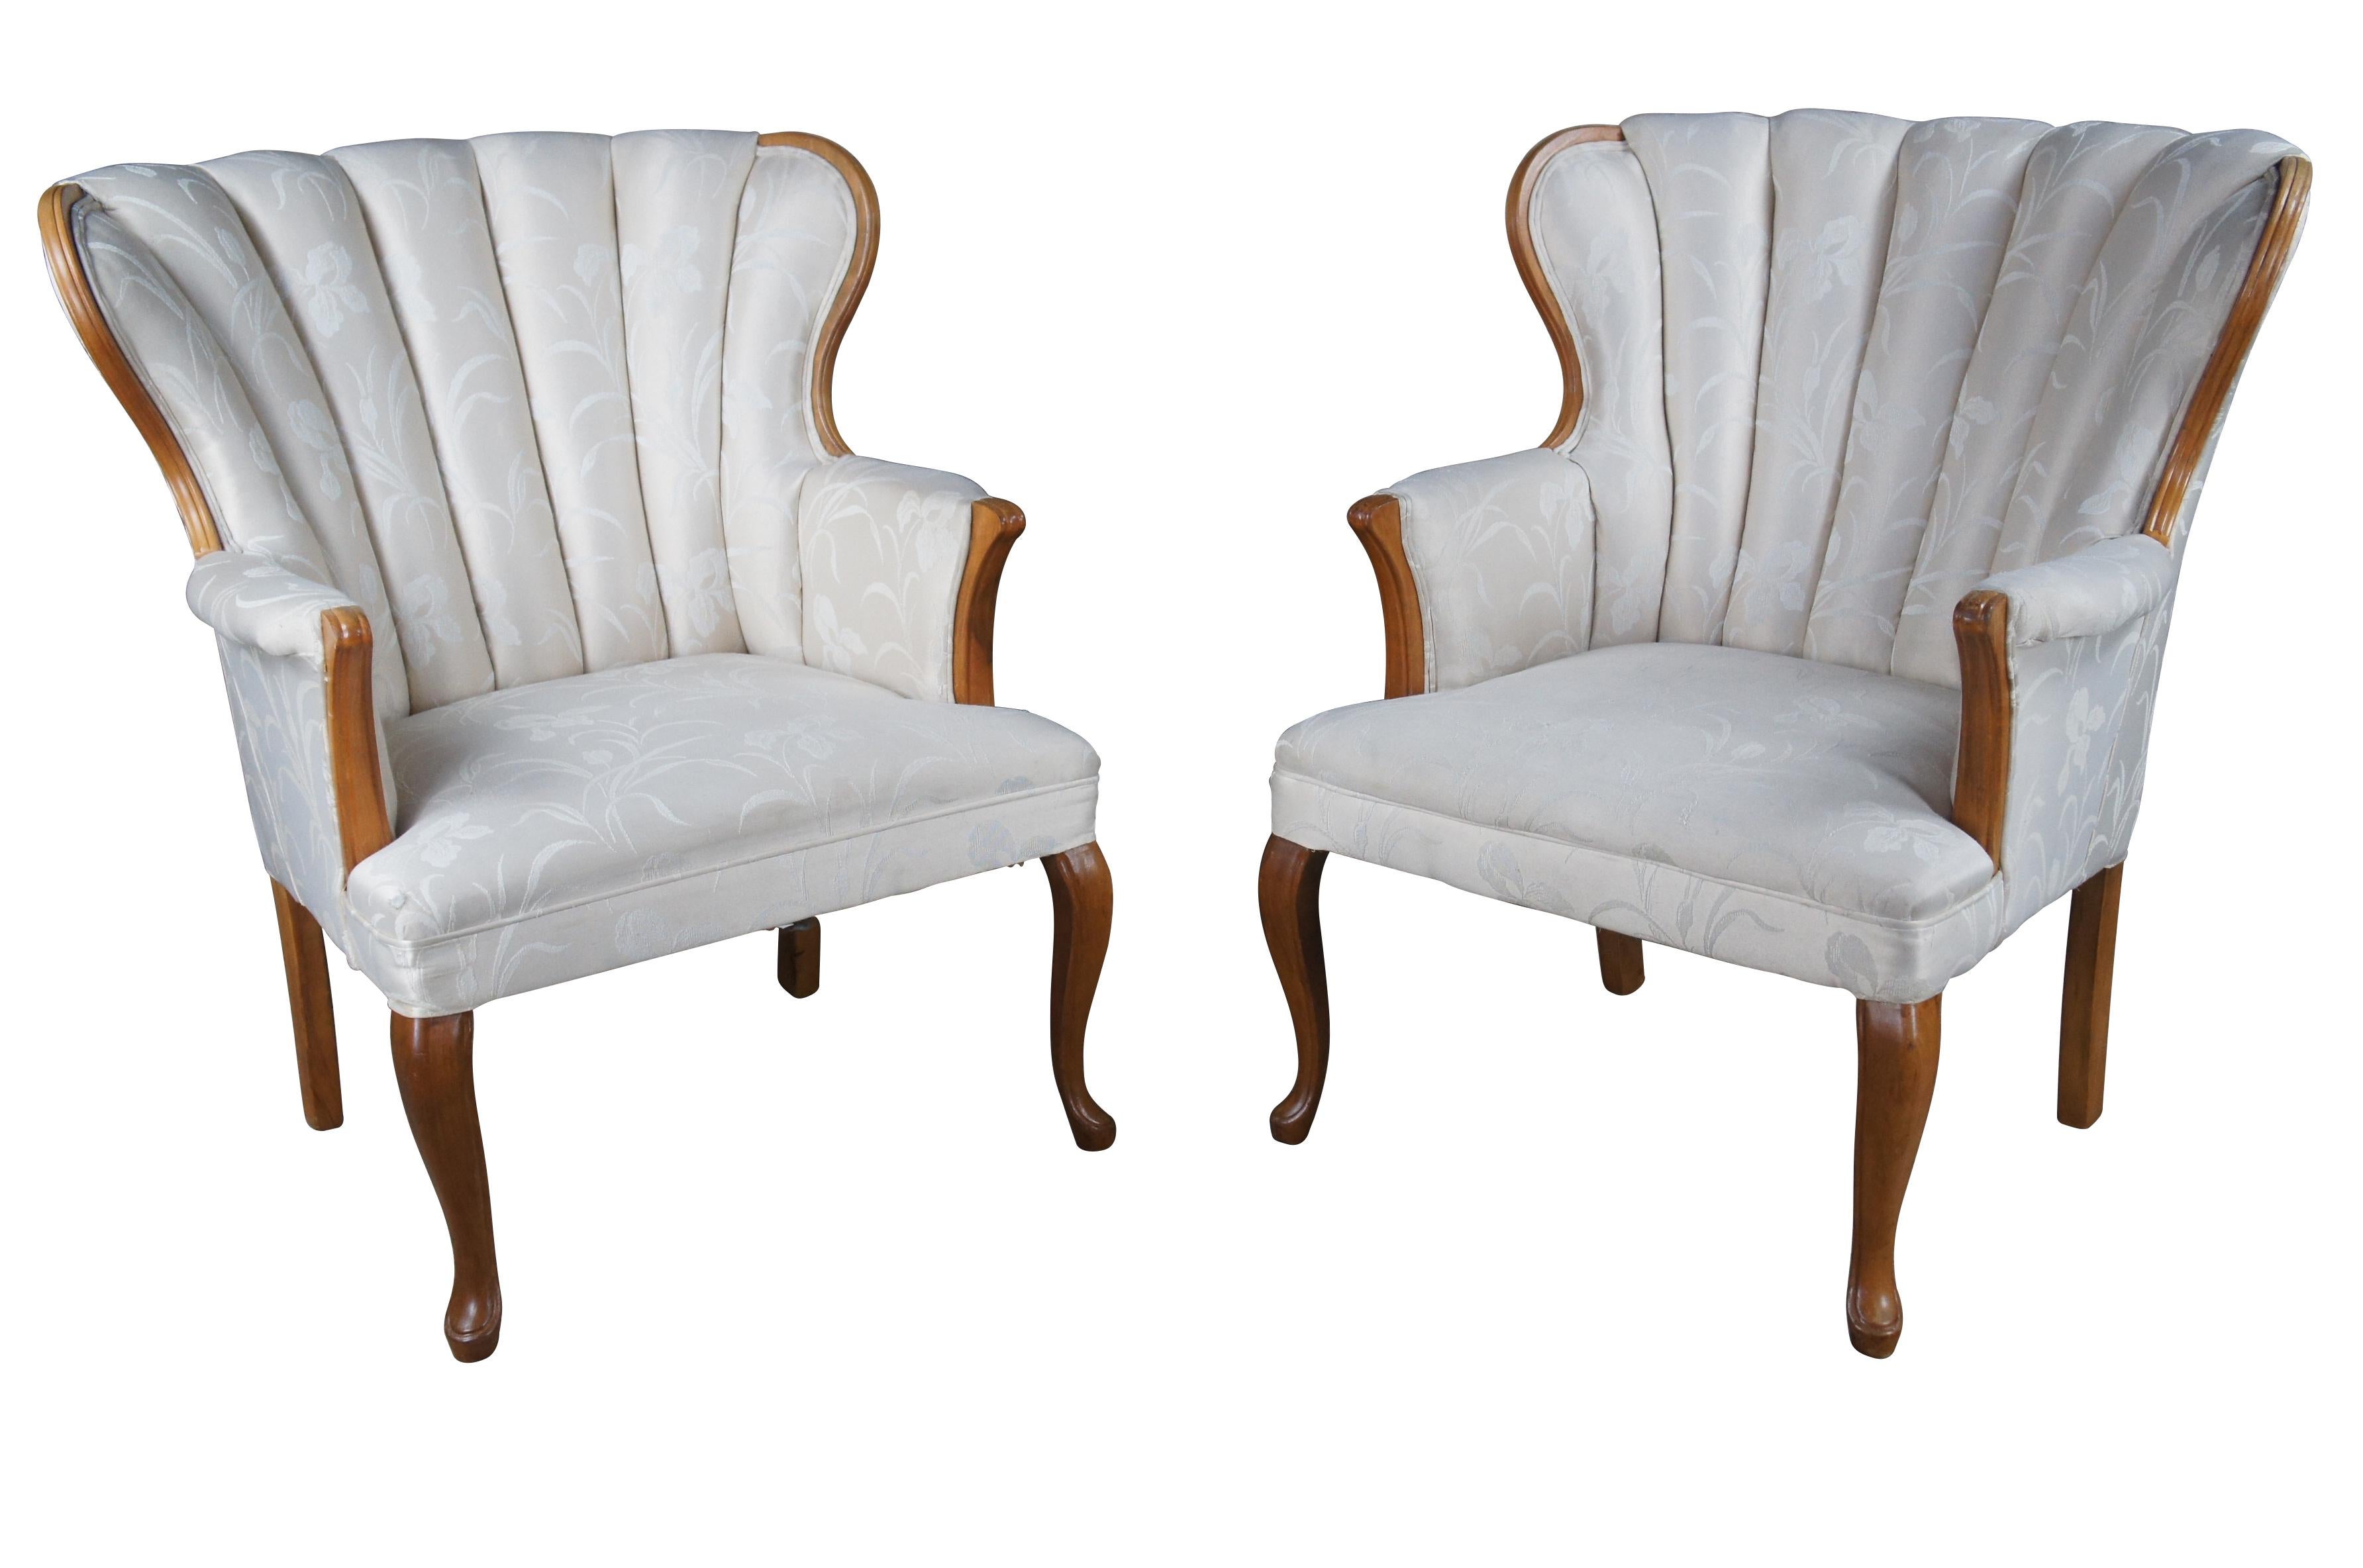 A graceful pair of mid 20th century library wingback chairs.  Made from mahogany with a raised floral upholstered channel back. The chair is supported by cabriole legs along the front and square legs at the rear.  


Dimensions:
30